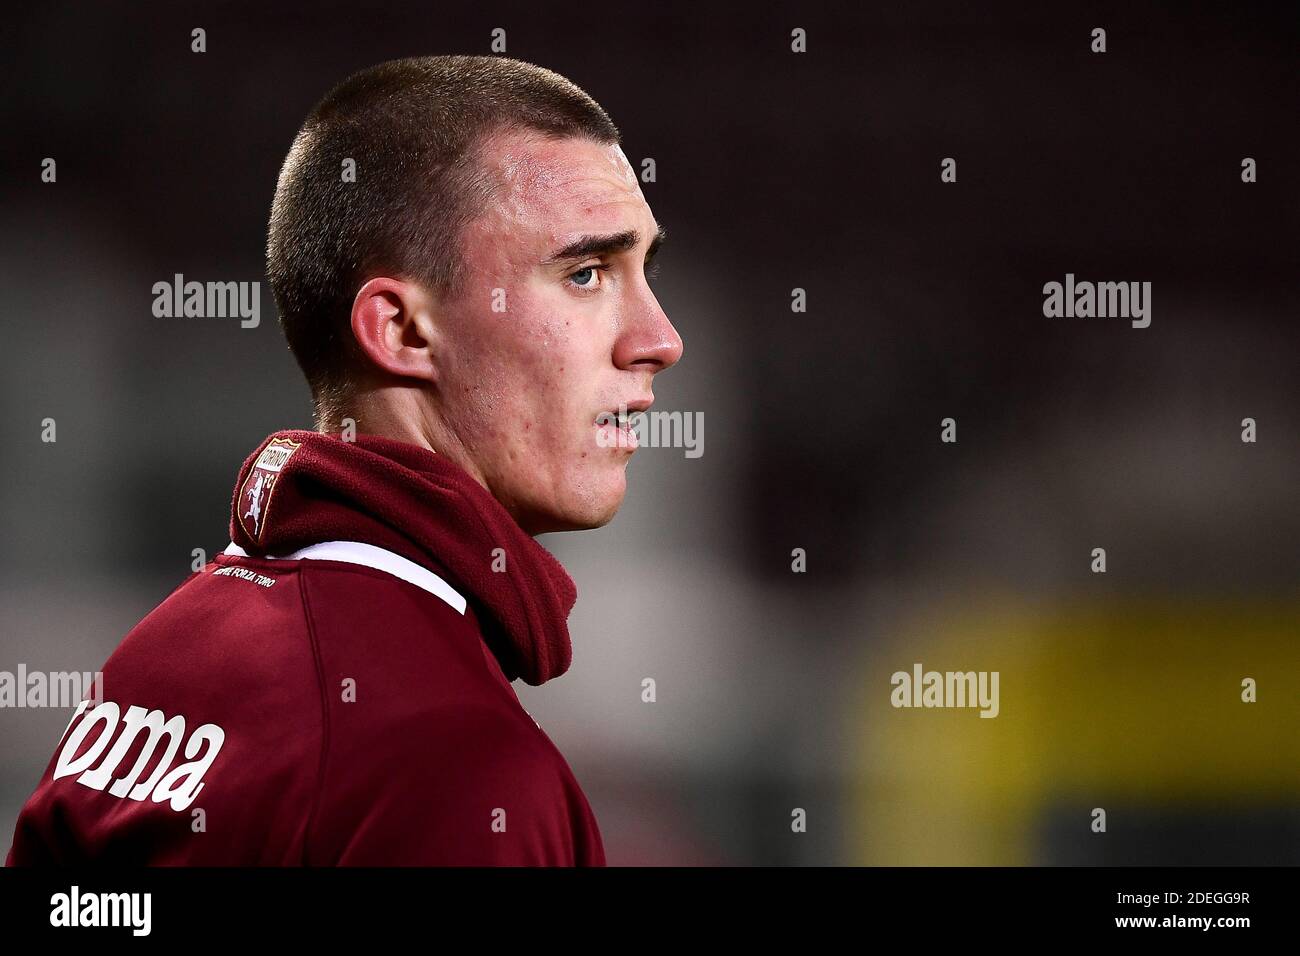 Turin, Italy - 30 November, 2020: Altin Kryeziu of Torino FC looks on at the end of the Serie A football match between Torino FC and UC Sampdoria. The match ended 2-2 tie. Credit: Nicolò Campo/Alamy Live News Stock Photo